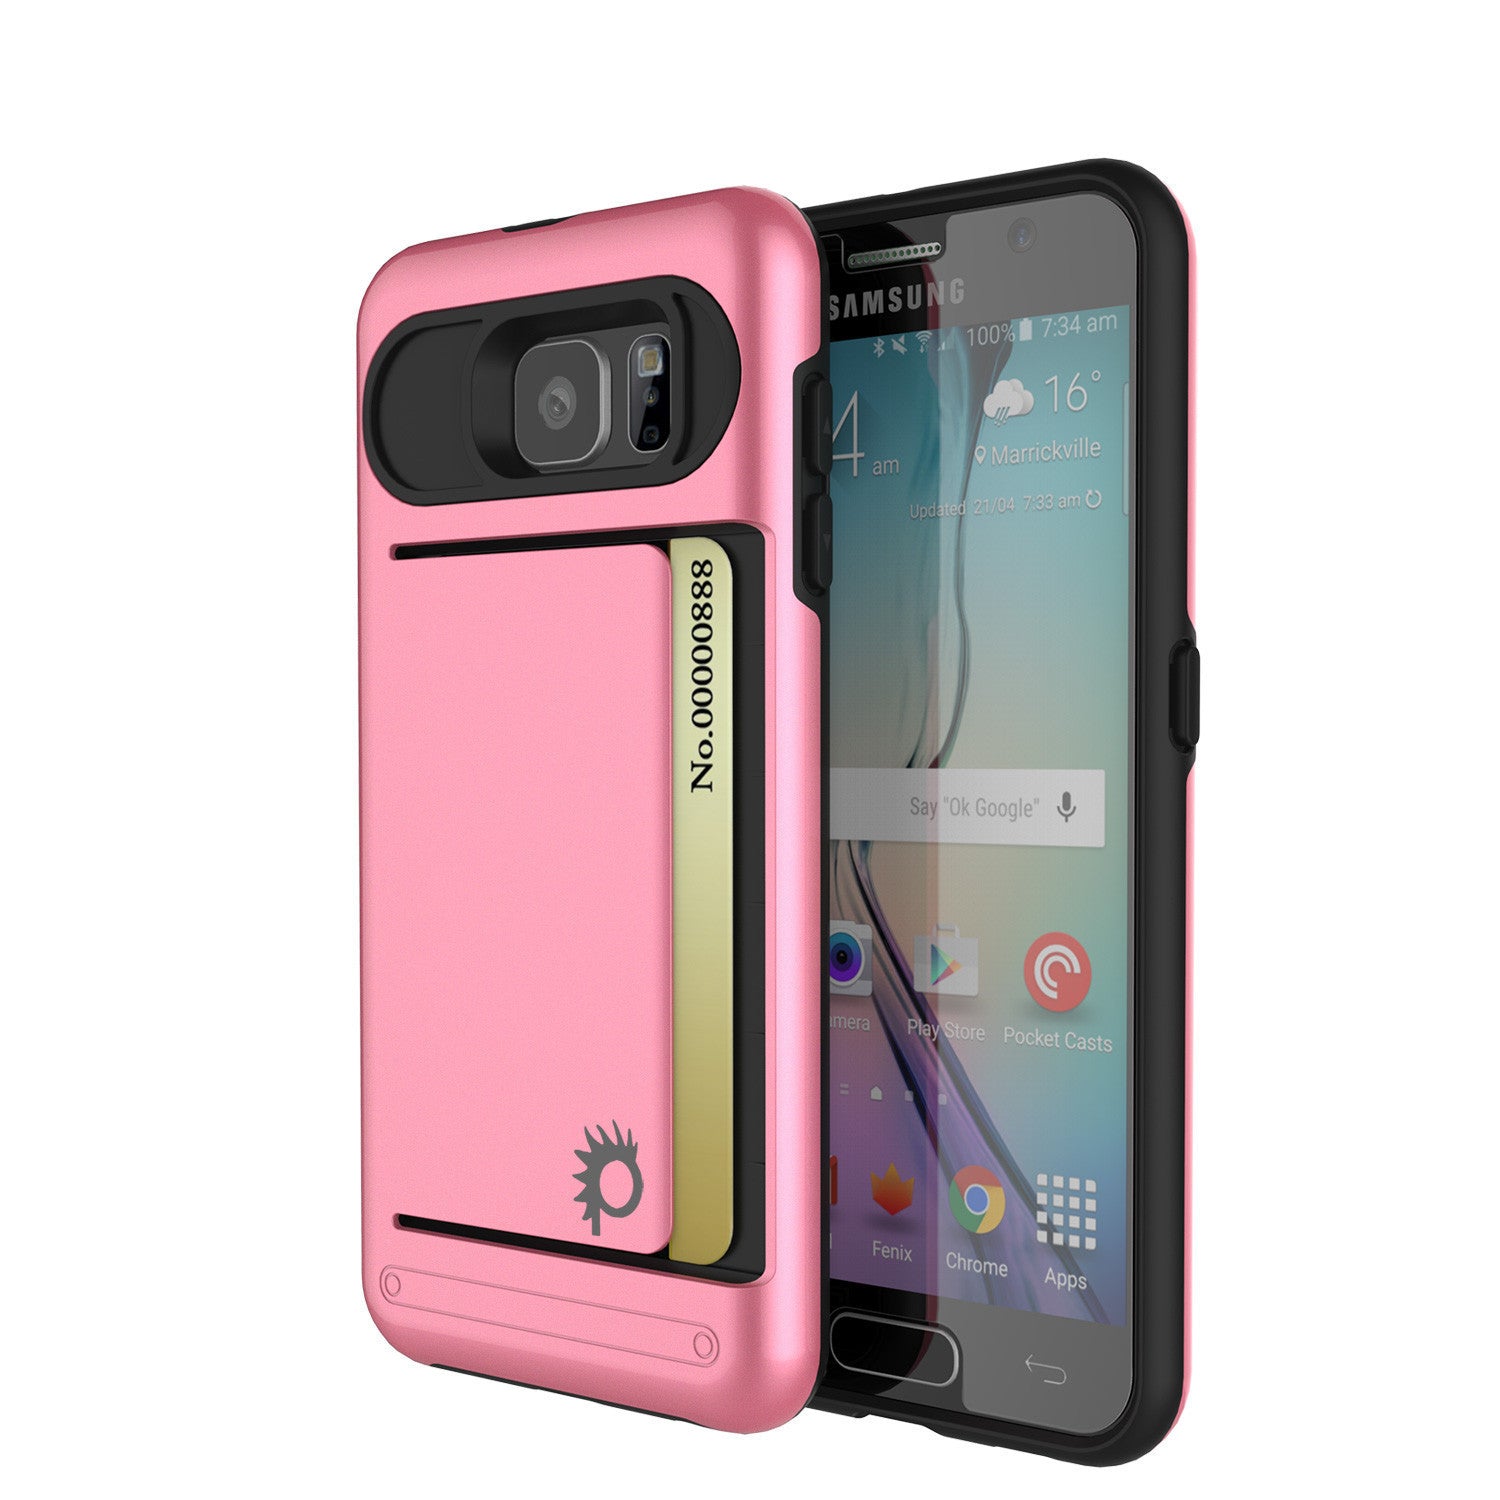 Galaxy S6 EDGE Case PunkCase CLUTCH Pink Series Slim Armor Soft Cover Case w/ Screen Protector (Color in image: Pink)